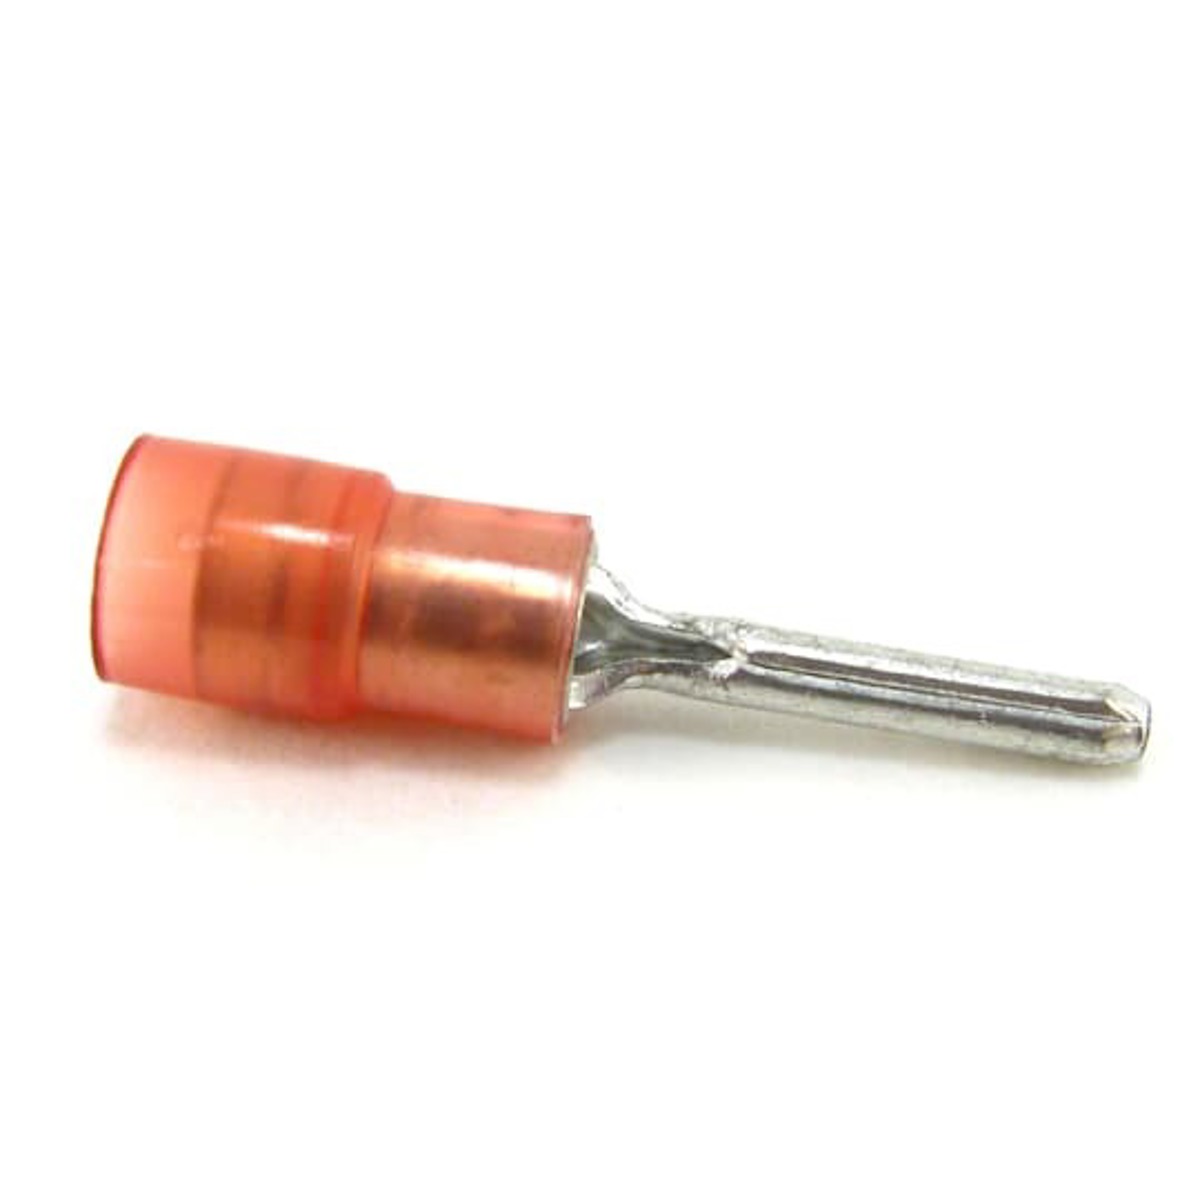 Vinyl Insulated Pin Terminal Length 85 Inches Pin Length 390 Crescent Electric Supply Company